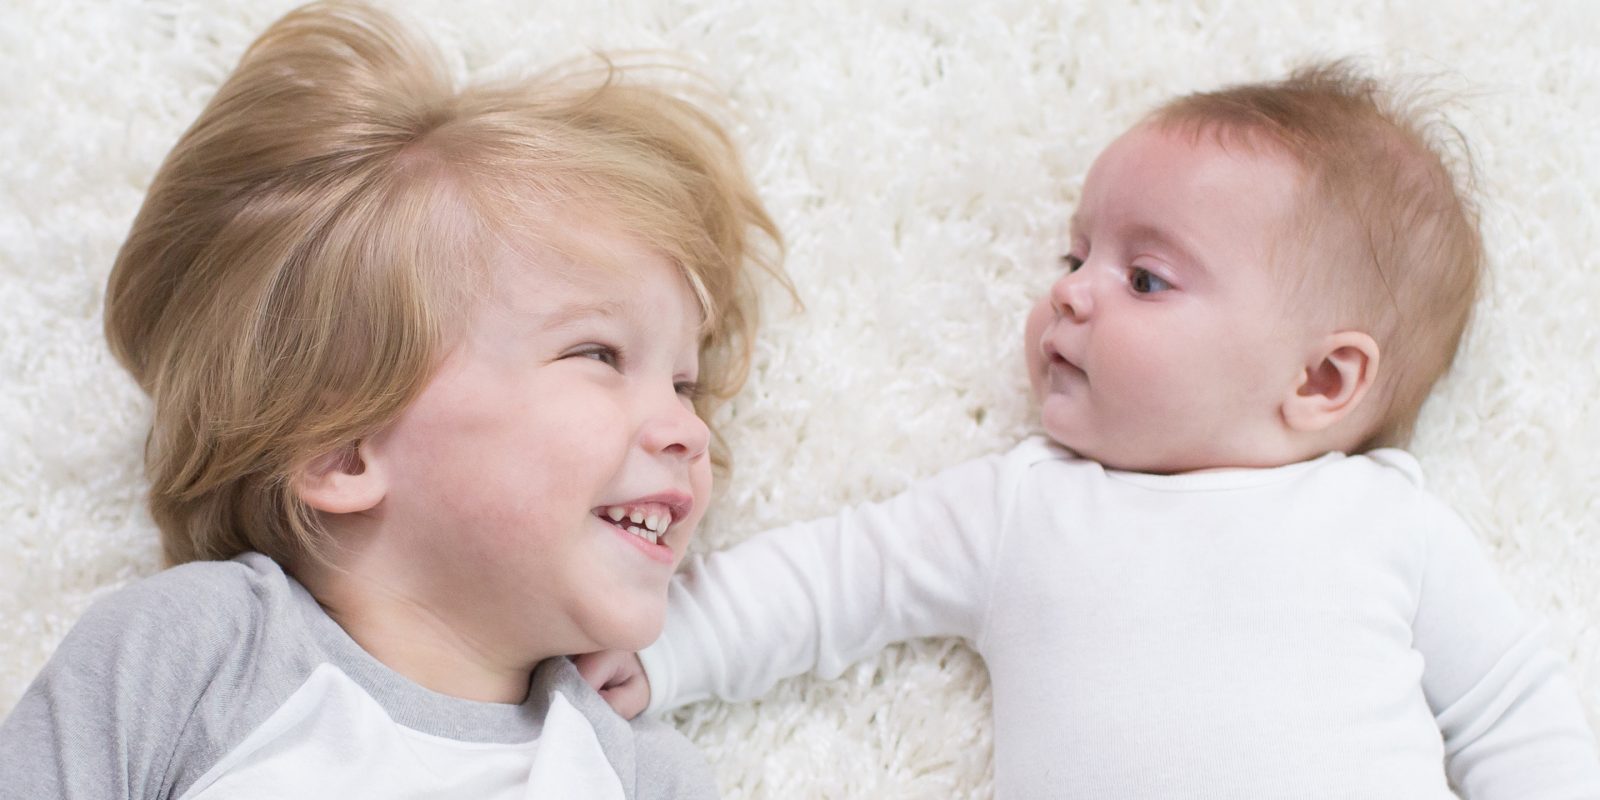 Toddler and baby laying on rug together